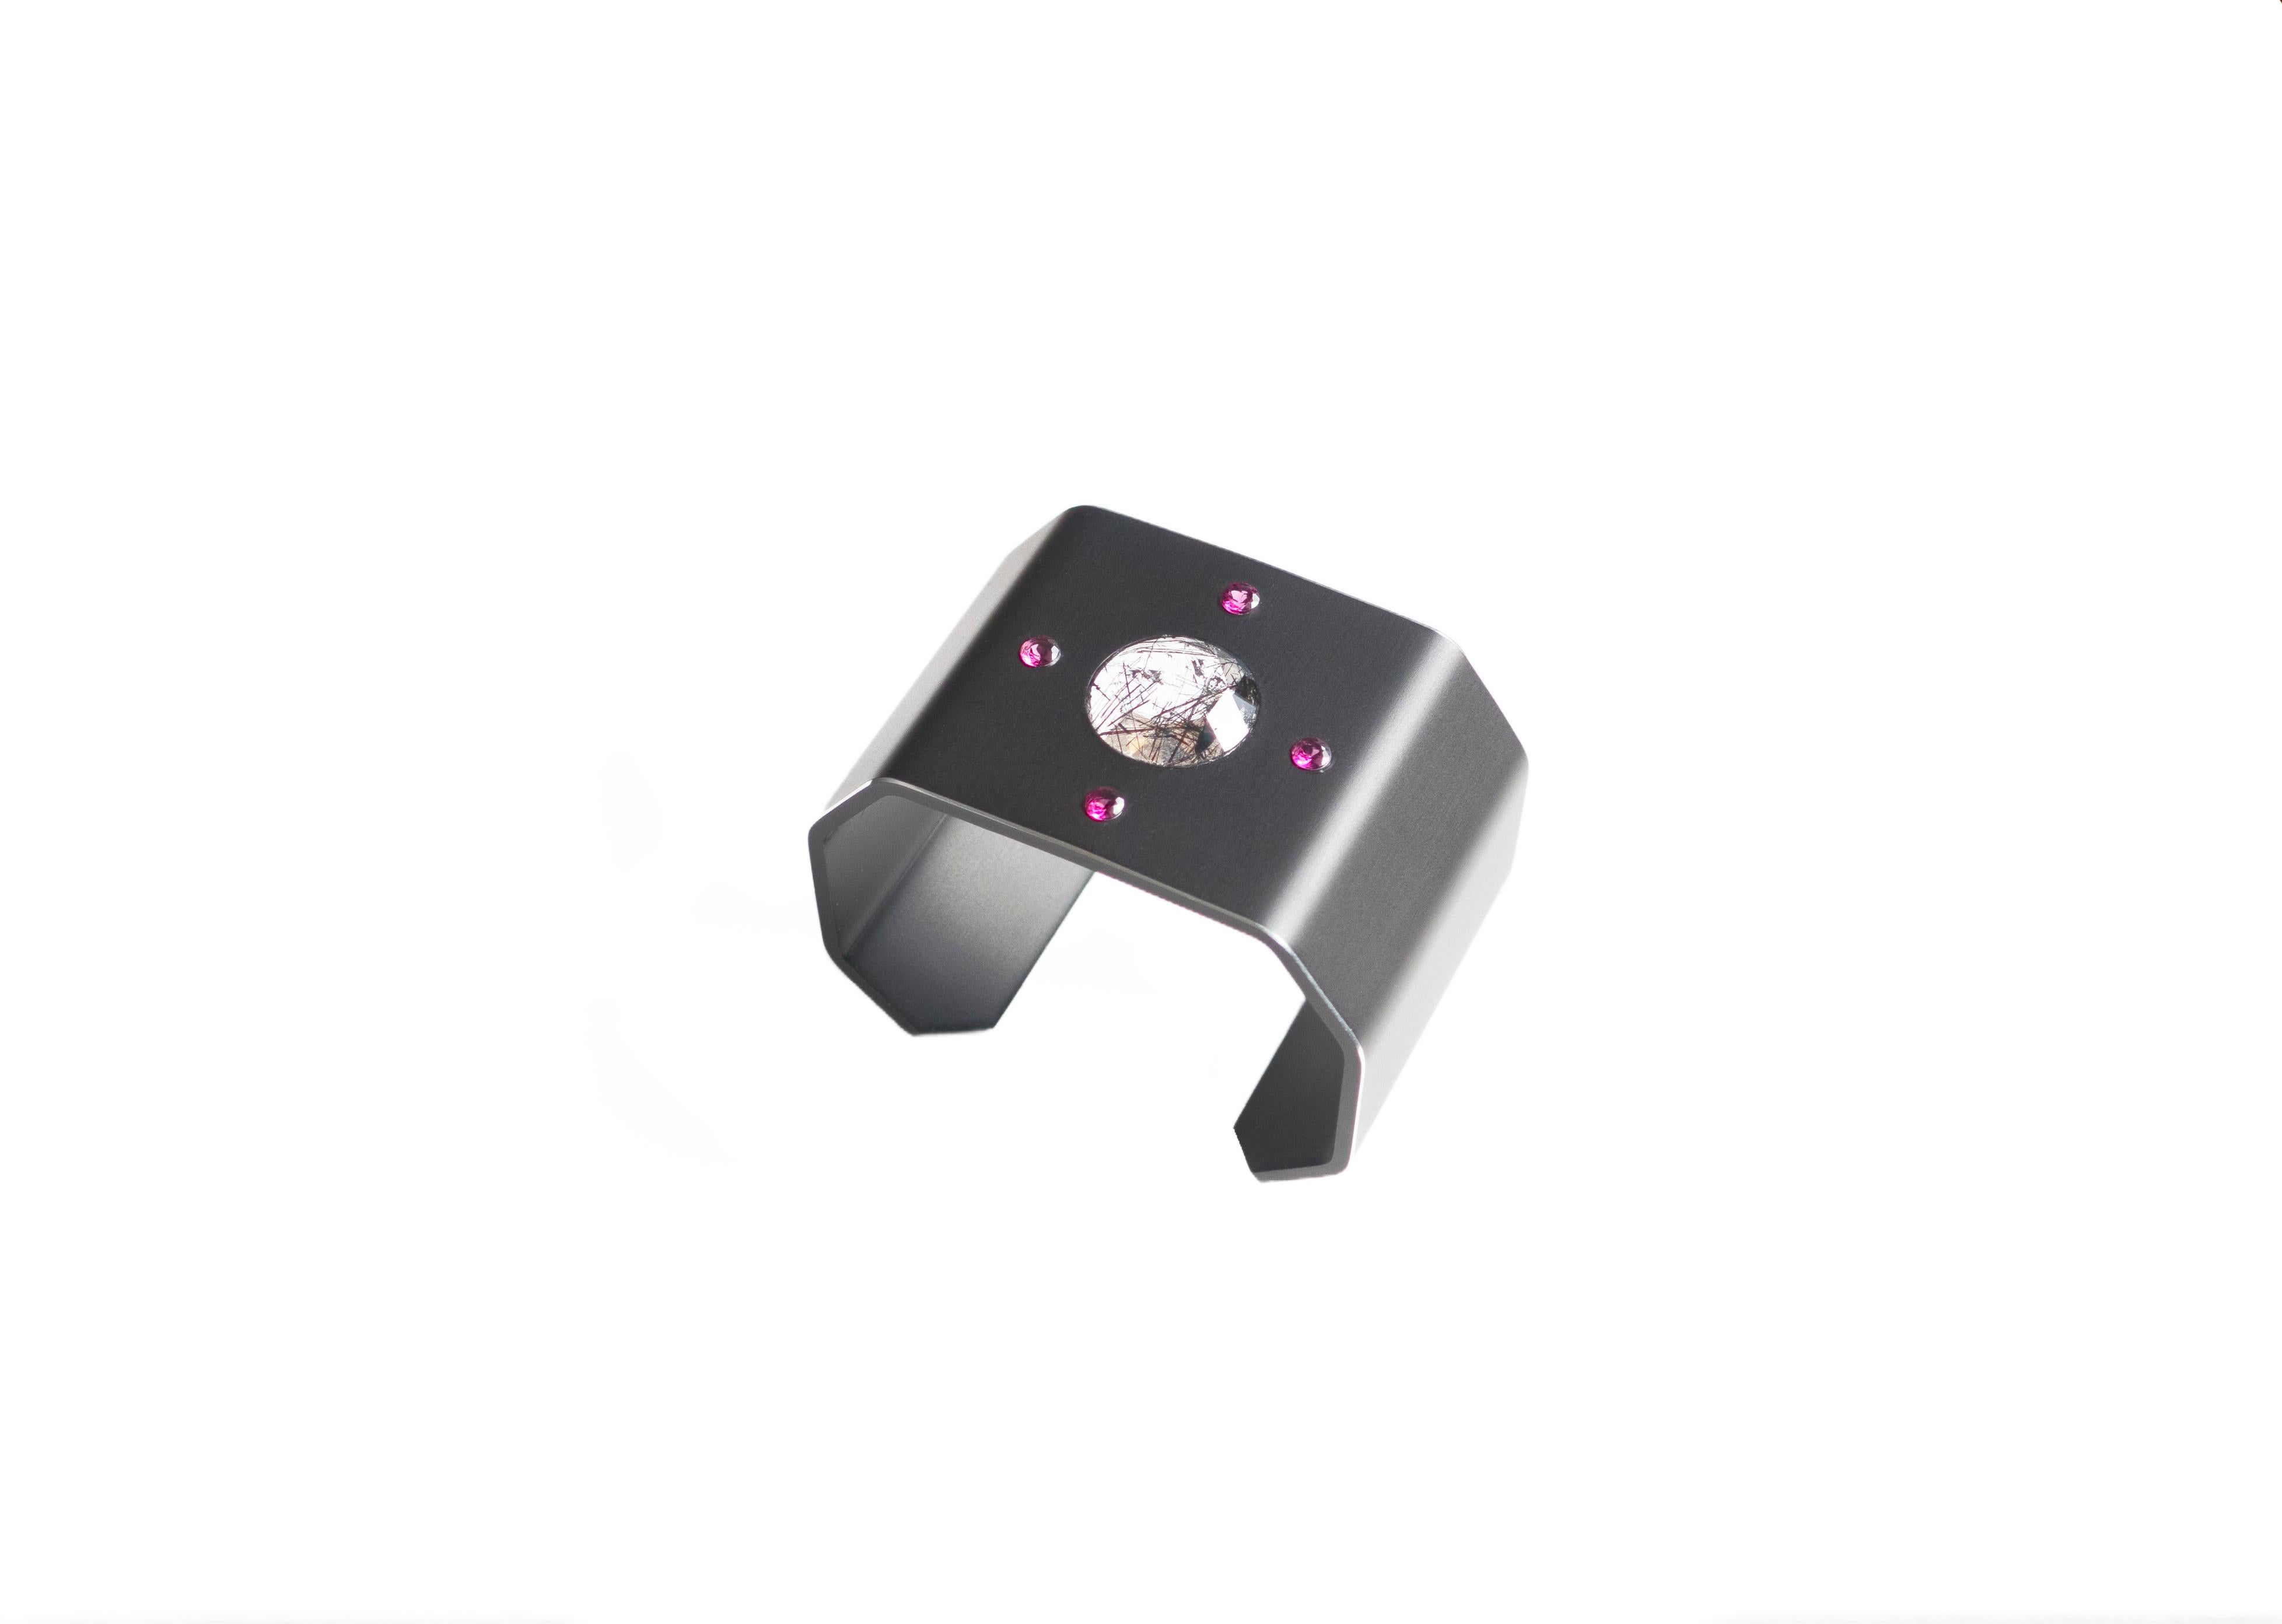 Mirus cuff by Studio C at Second Petale Gallery

This highly modern and graphic cuff is made up of black anodised aluminium. It is adorned with a rose-cut tourmaline-quartz, custom-made by a French stone-cutter
and four small rhodolite